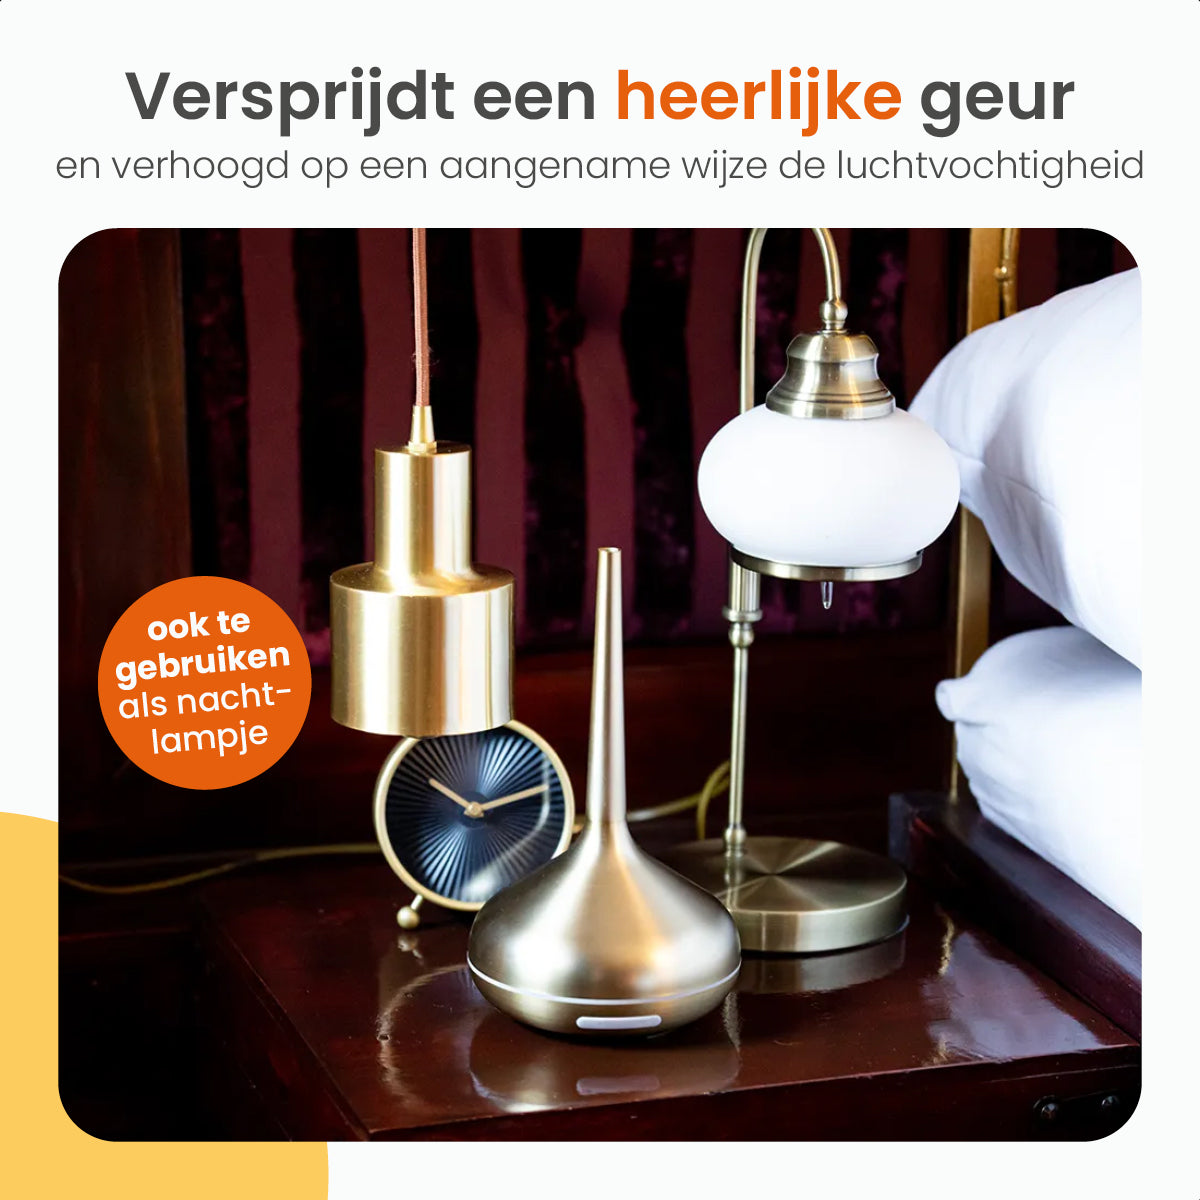 Goliving Aroma Diffuser - Incl. 2x Etherische Olie